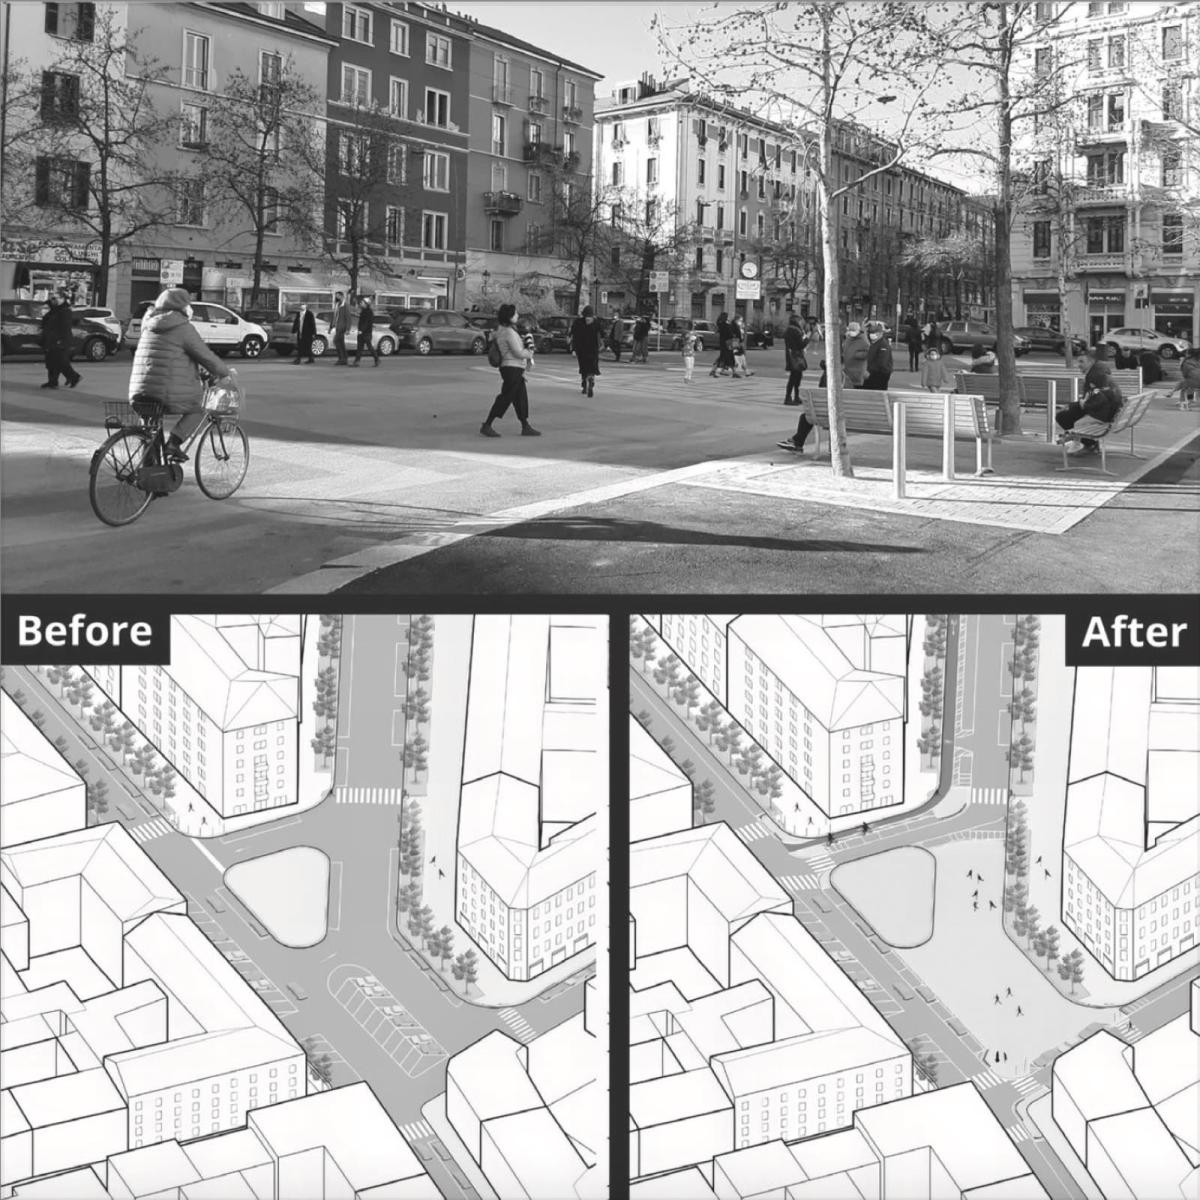 A photo of an open square with benches, people walking, and a person on a bike, on top of a before and after illustration that shows the square's transformation